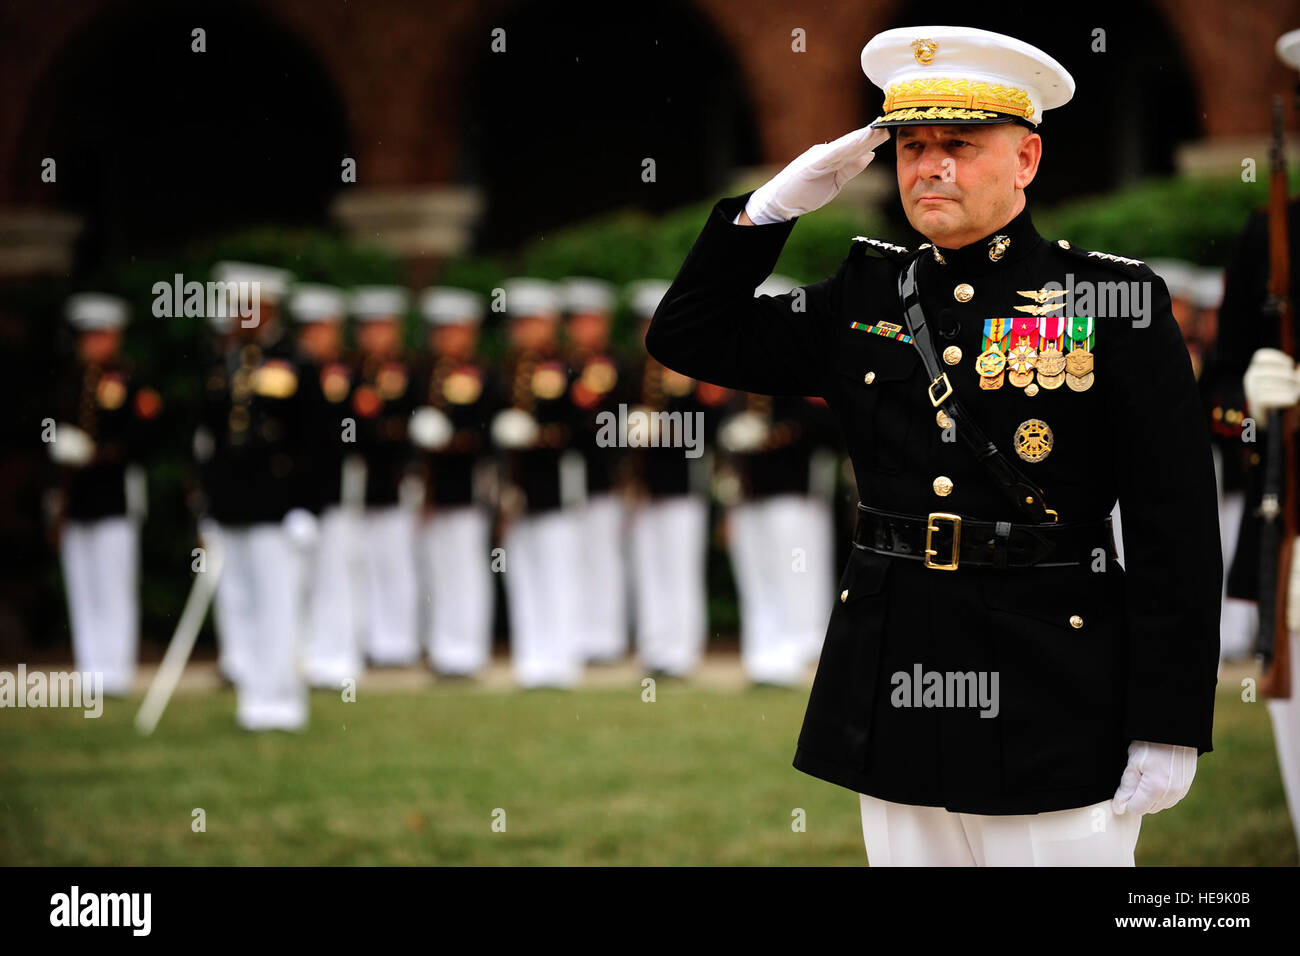 Joint Chiefs of Staff Vice Chairman Gen. James E. Cartwright salutes during the playing of the national anthem during a farewell ceremony in his honor at the Marine Corps Barracks, Washington, D.C., Aug. 3, 2011.  Tech. Sgt. Jacob N. Bailey, U.S. Air Force Stock Photo